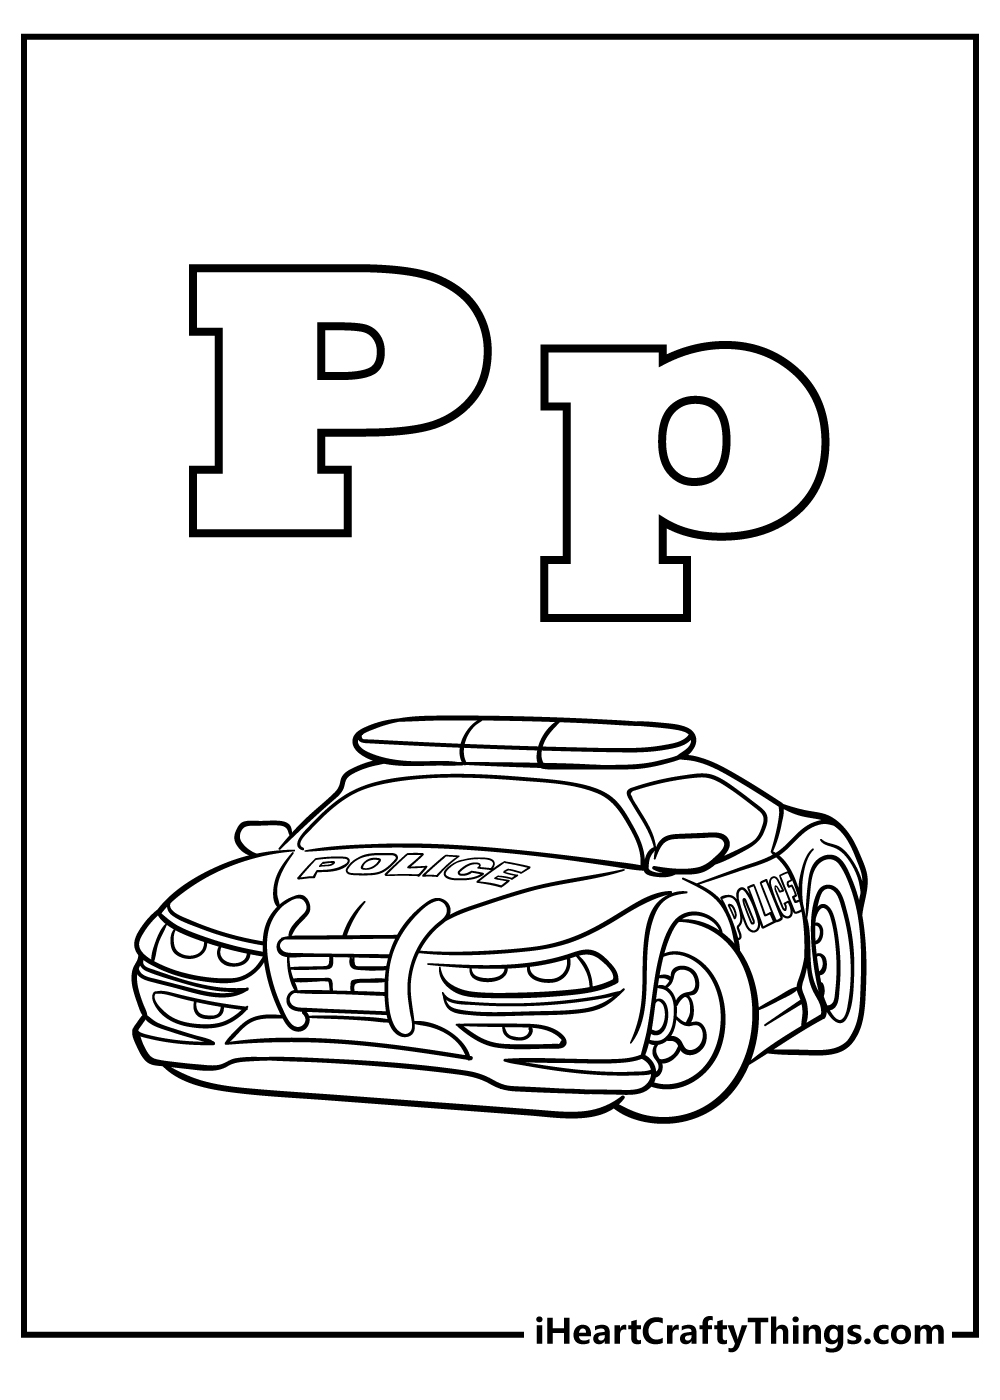 Letter P Coloring Pages free pdf download